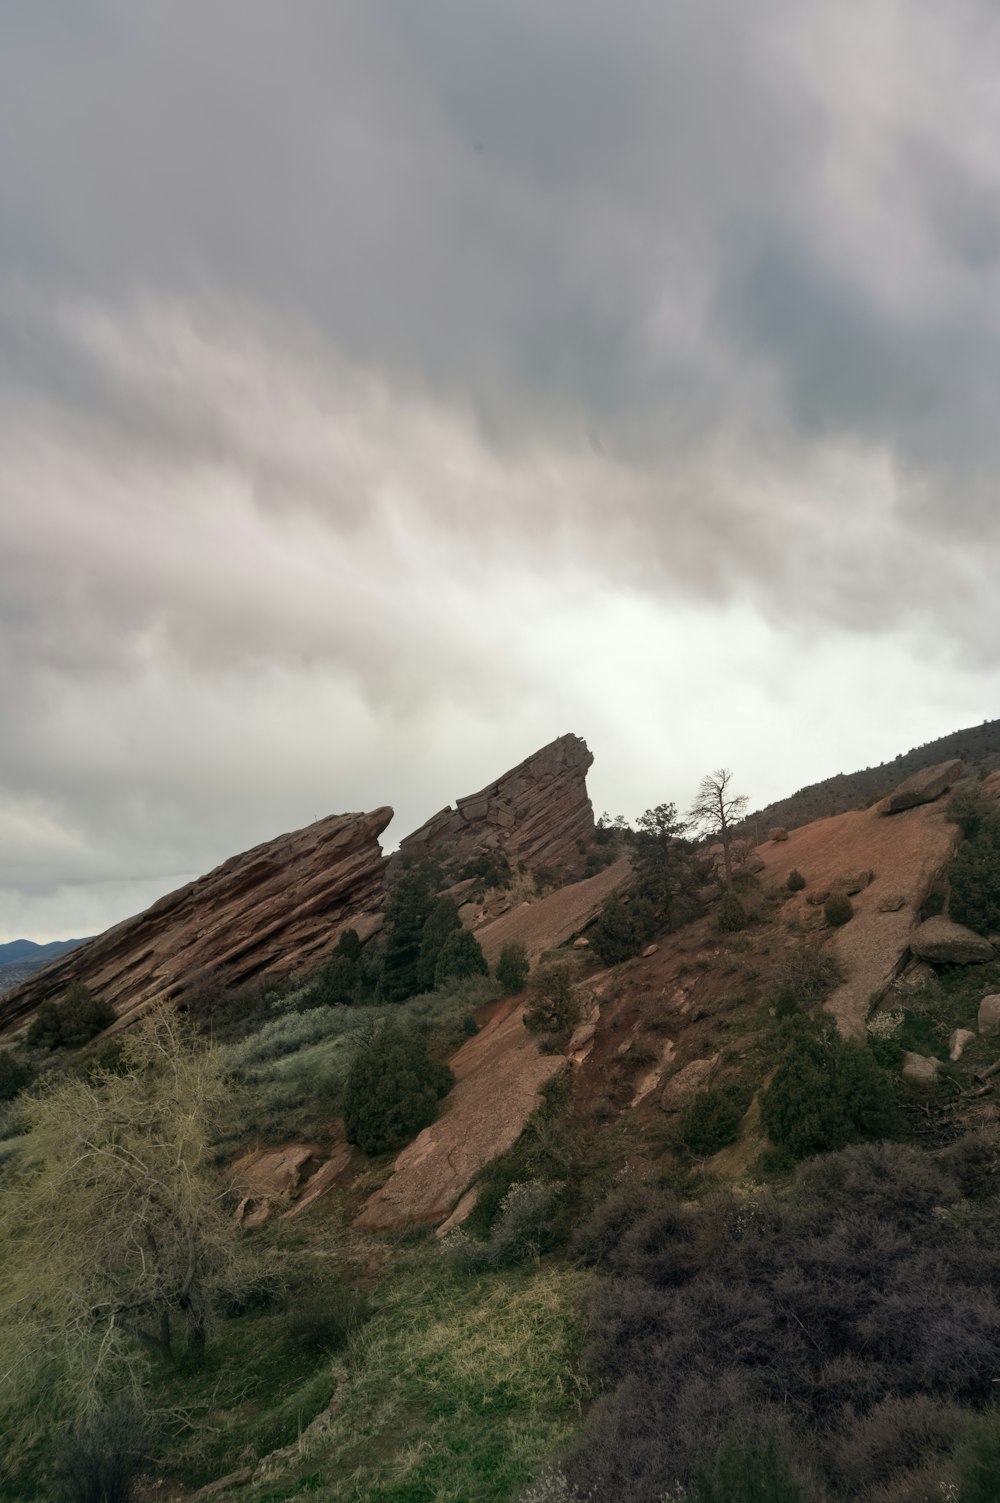 a large rock formation on a cloudy day